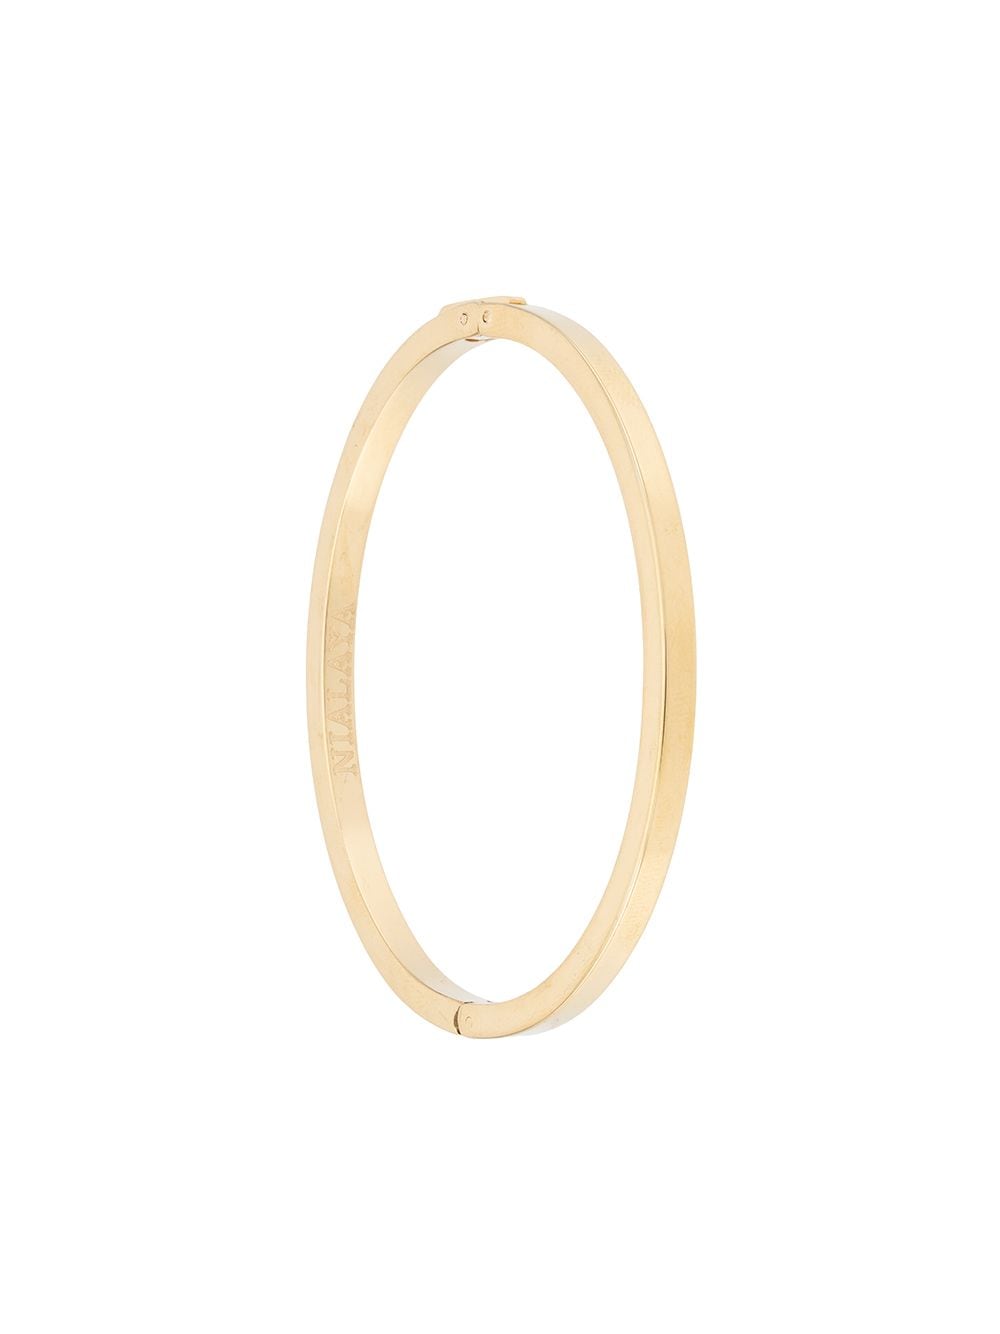 Simplicity gold-plated bangle